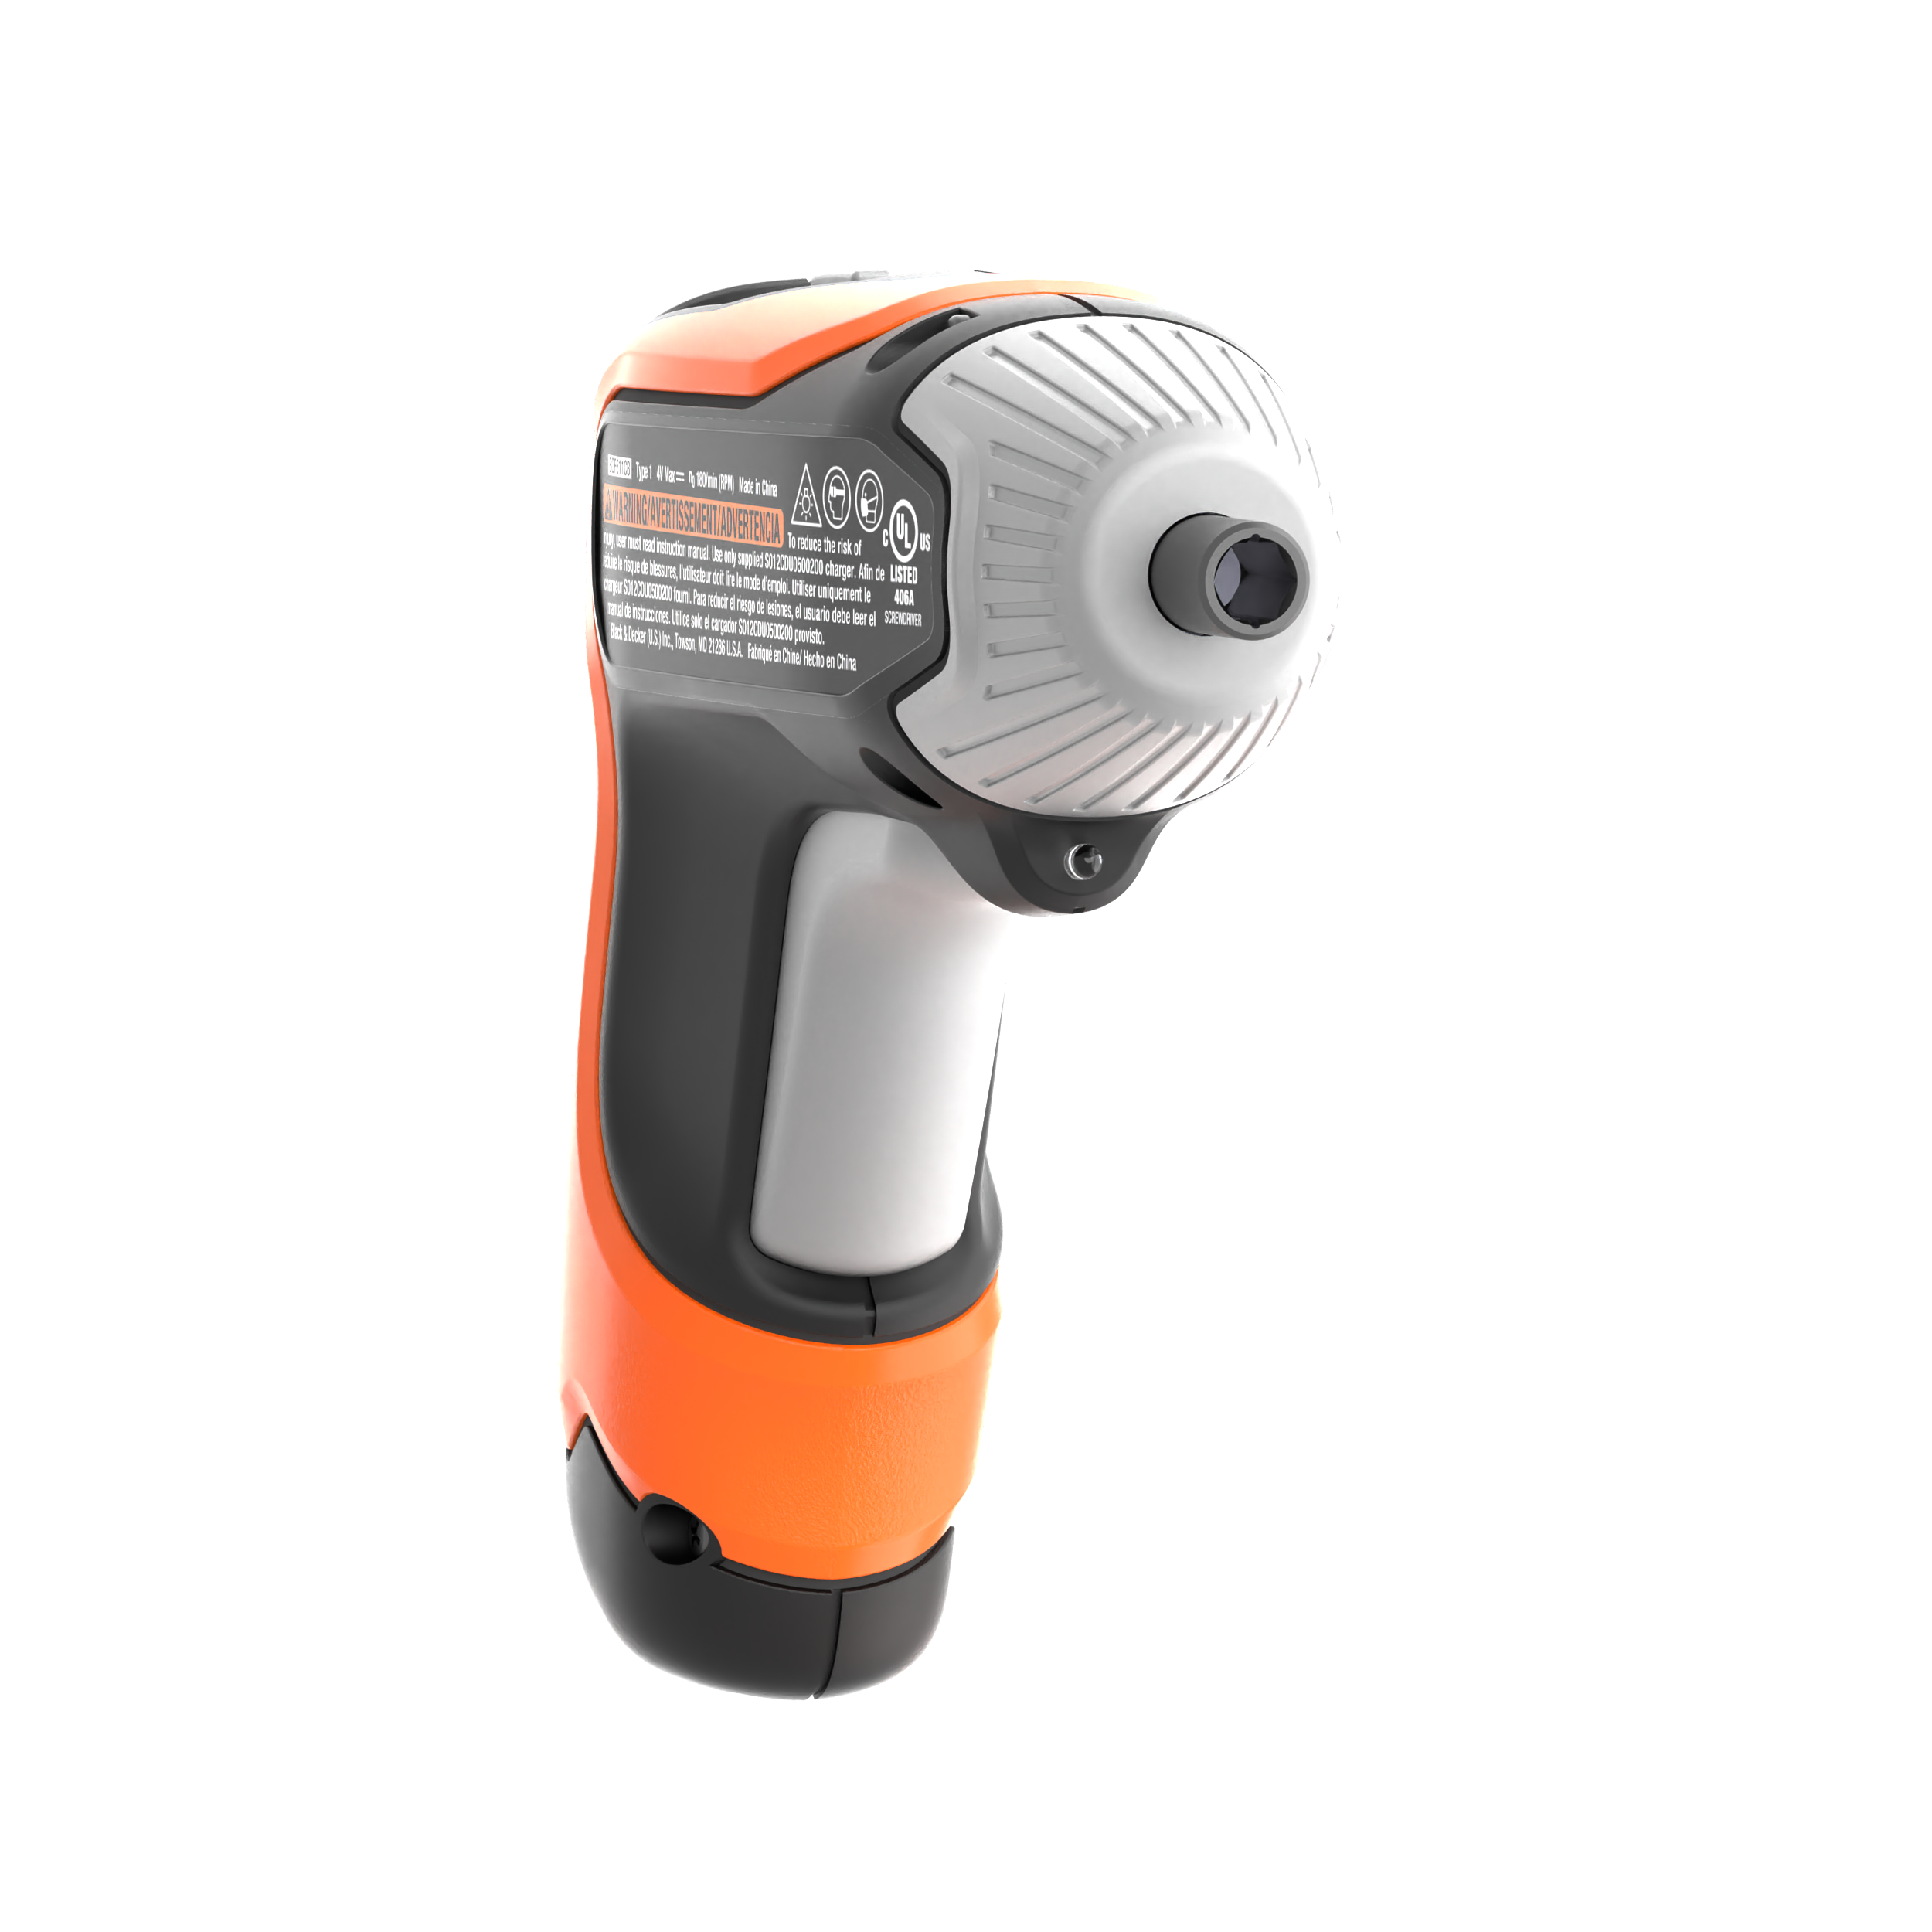 Black & Decker 4-Volt MAX Lithium-Ion Pivot 1/4 In. Cordless Screwdriver  with Accessories - Parker's Building Supply